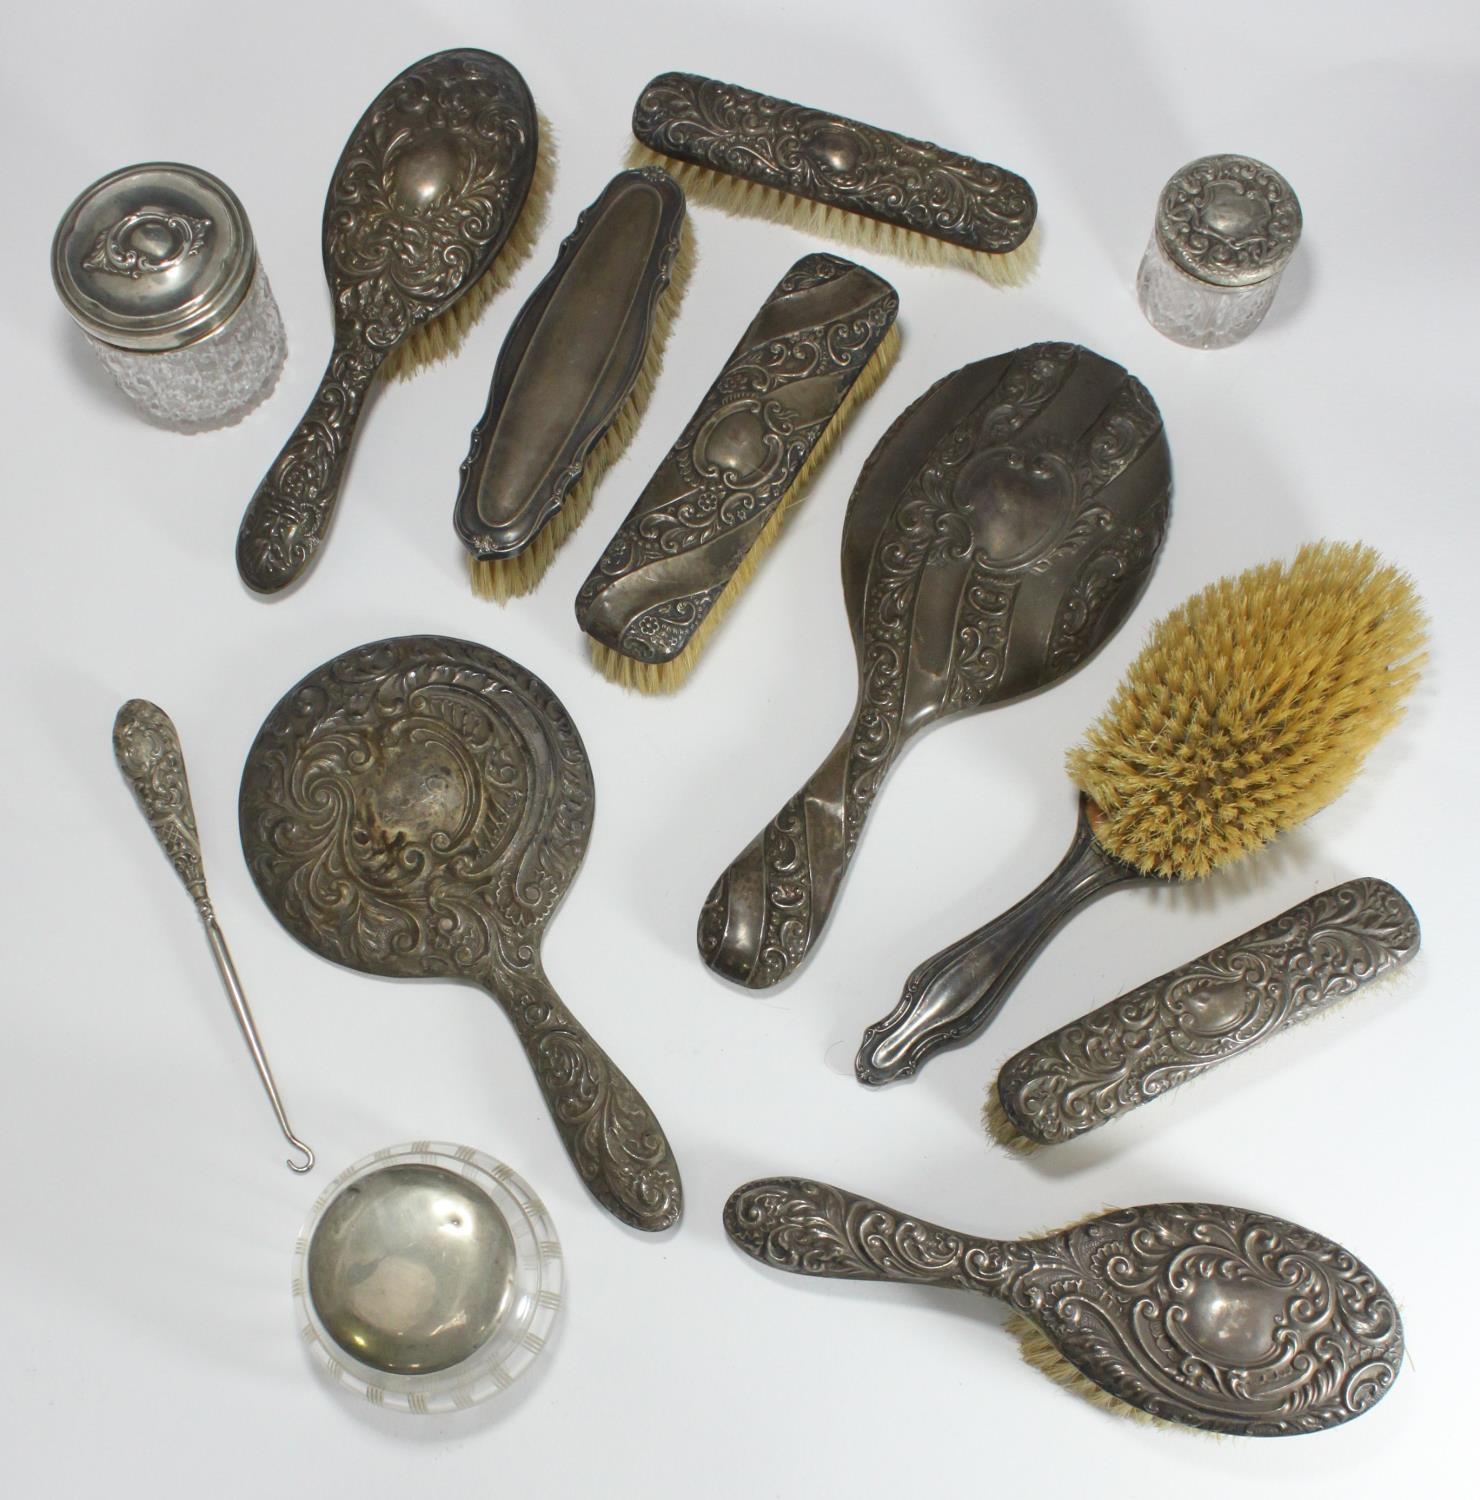 Nine various silver-backed brushes and mirrors, together with a silver-handled glove hook